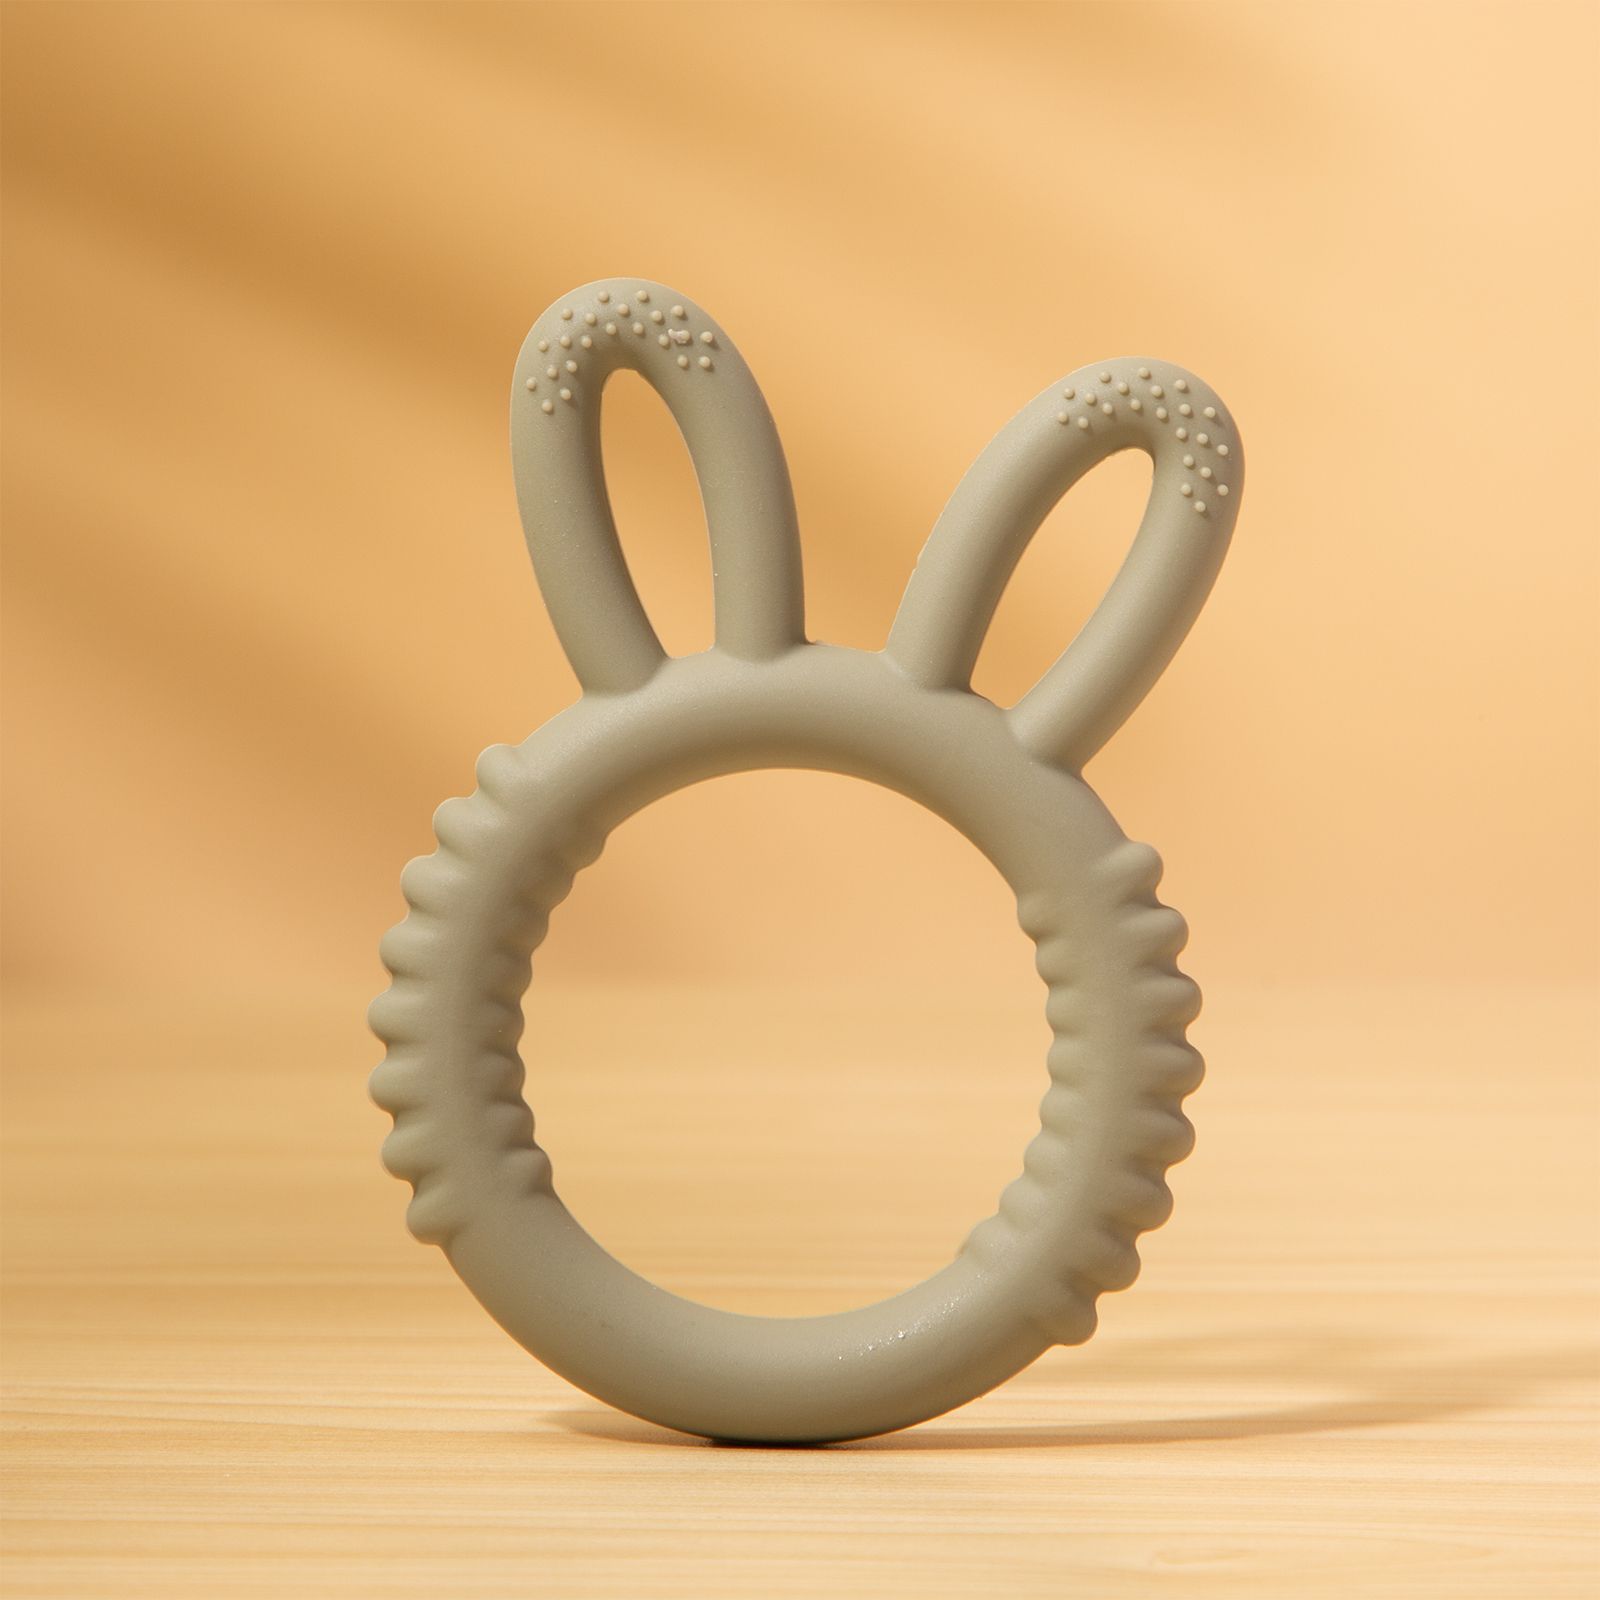 100% Food-Grade Materials BPA-Free Rabbit Ears Silicone Teething Toy For Babies